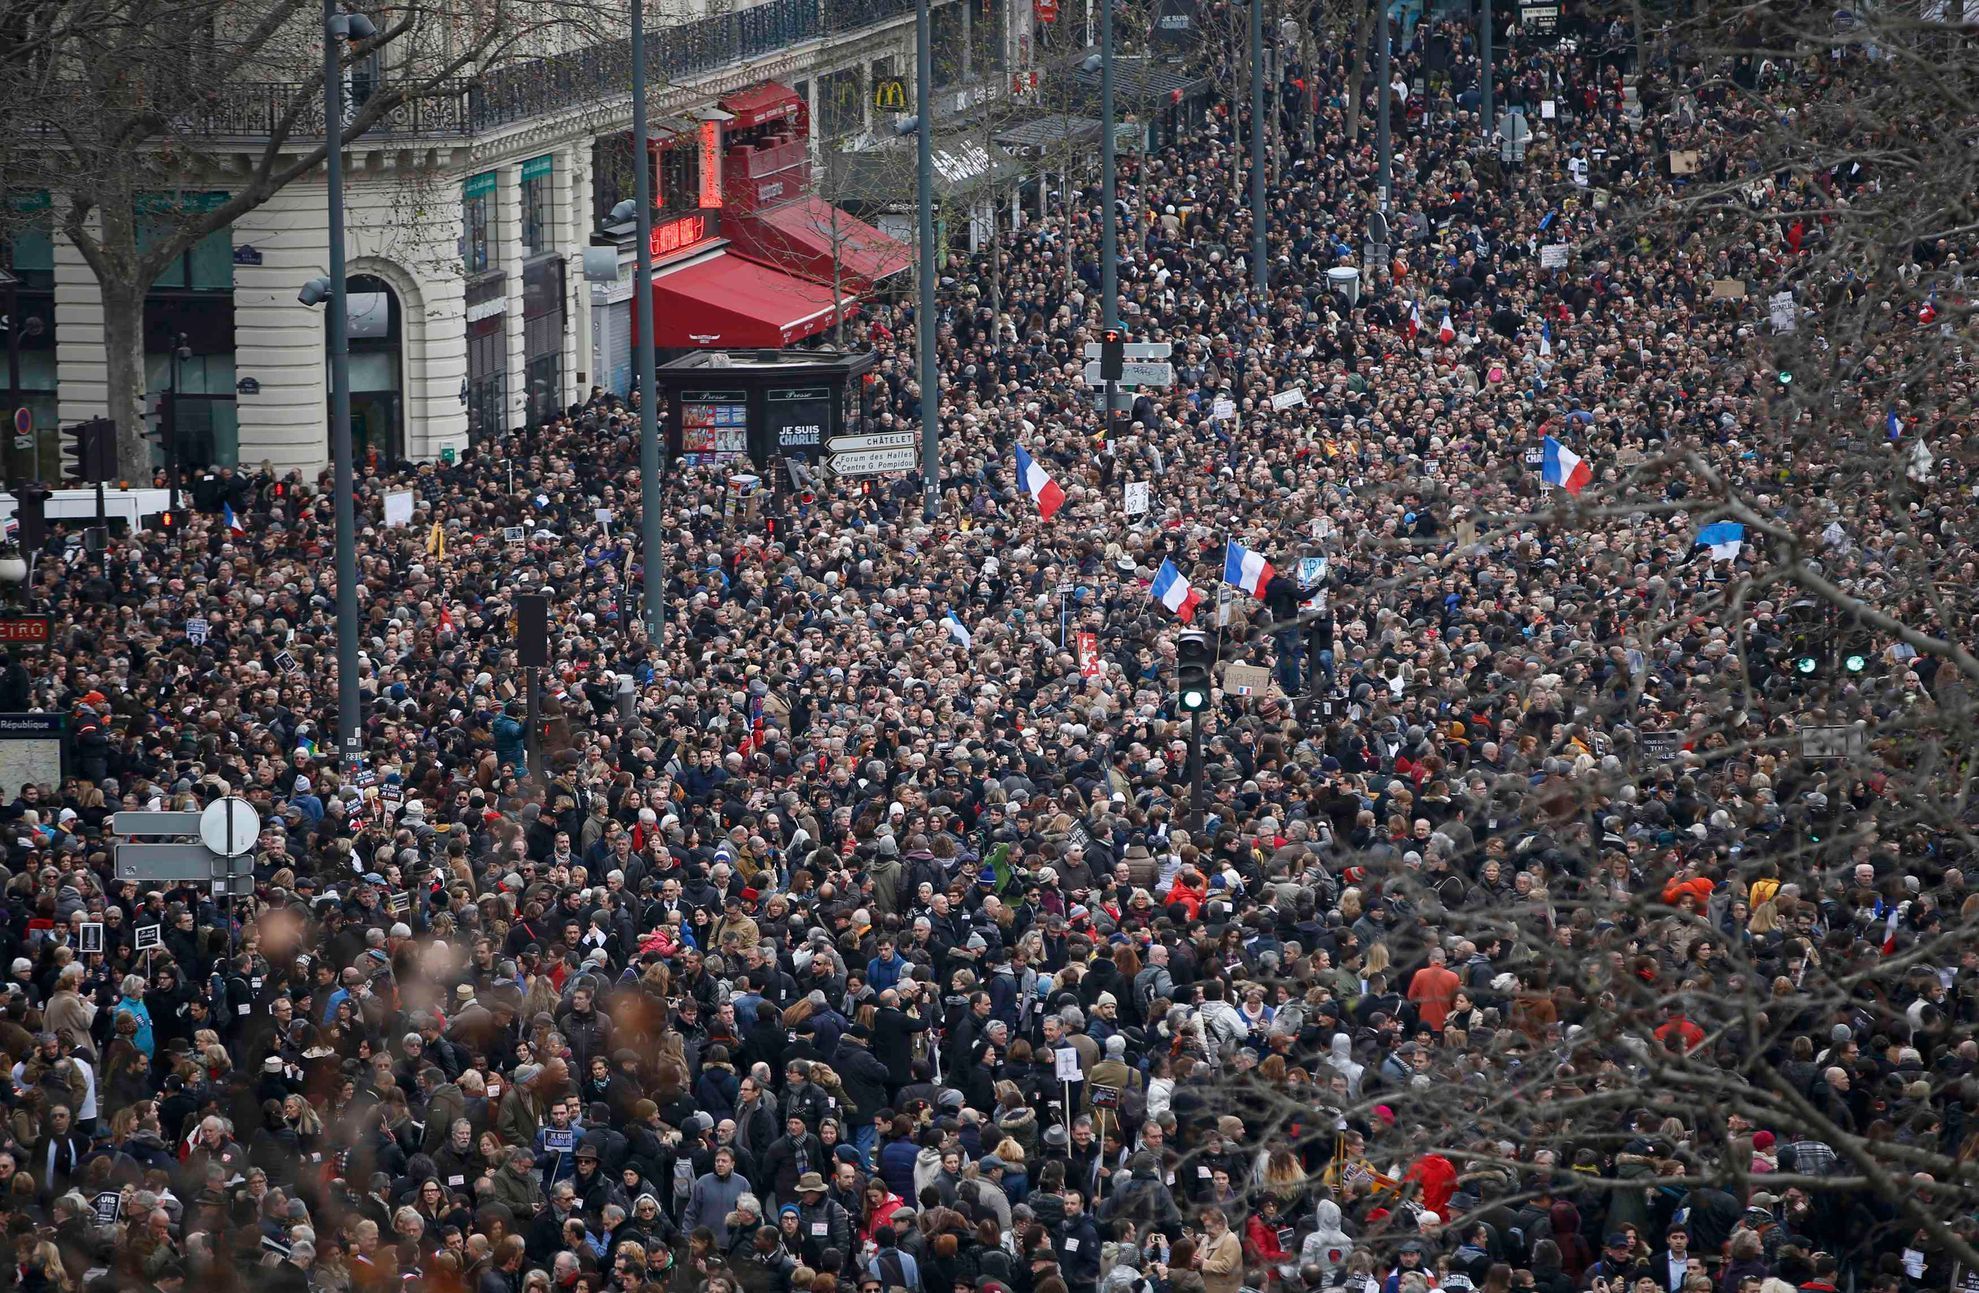 Hundreds of thousands of people gather on the Place de la Republique to attend the solidarity march (Rassemblement Republicain) in the streets of Paris